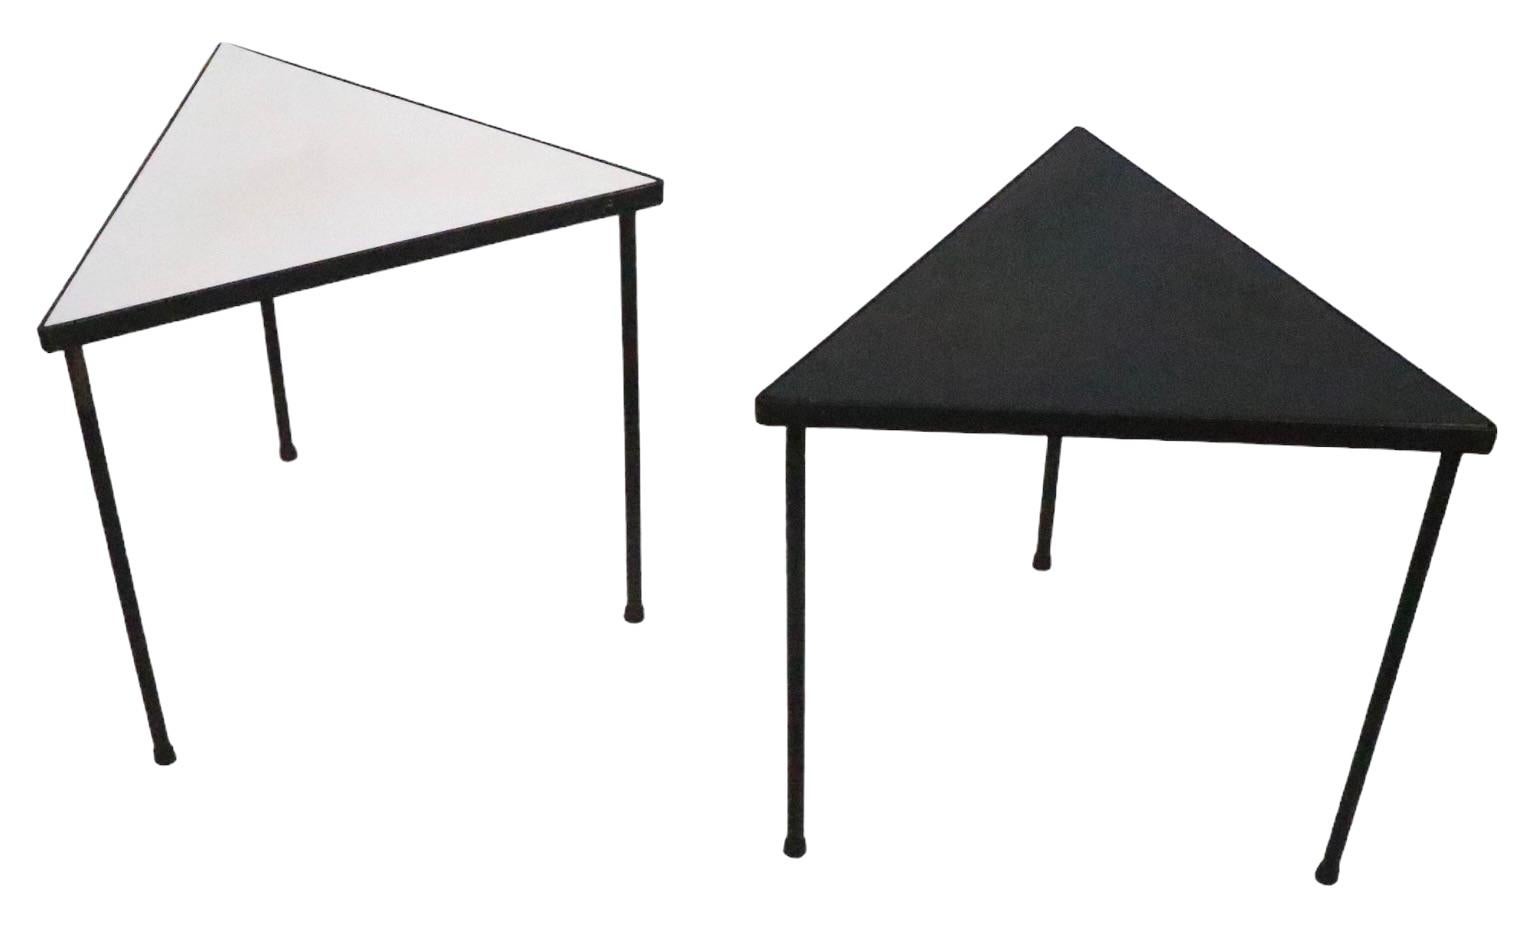  Set of 3 Mid Century Triangular  Stacking Tables by Frederic  Weinberg c 1950's For Sale 5